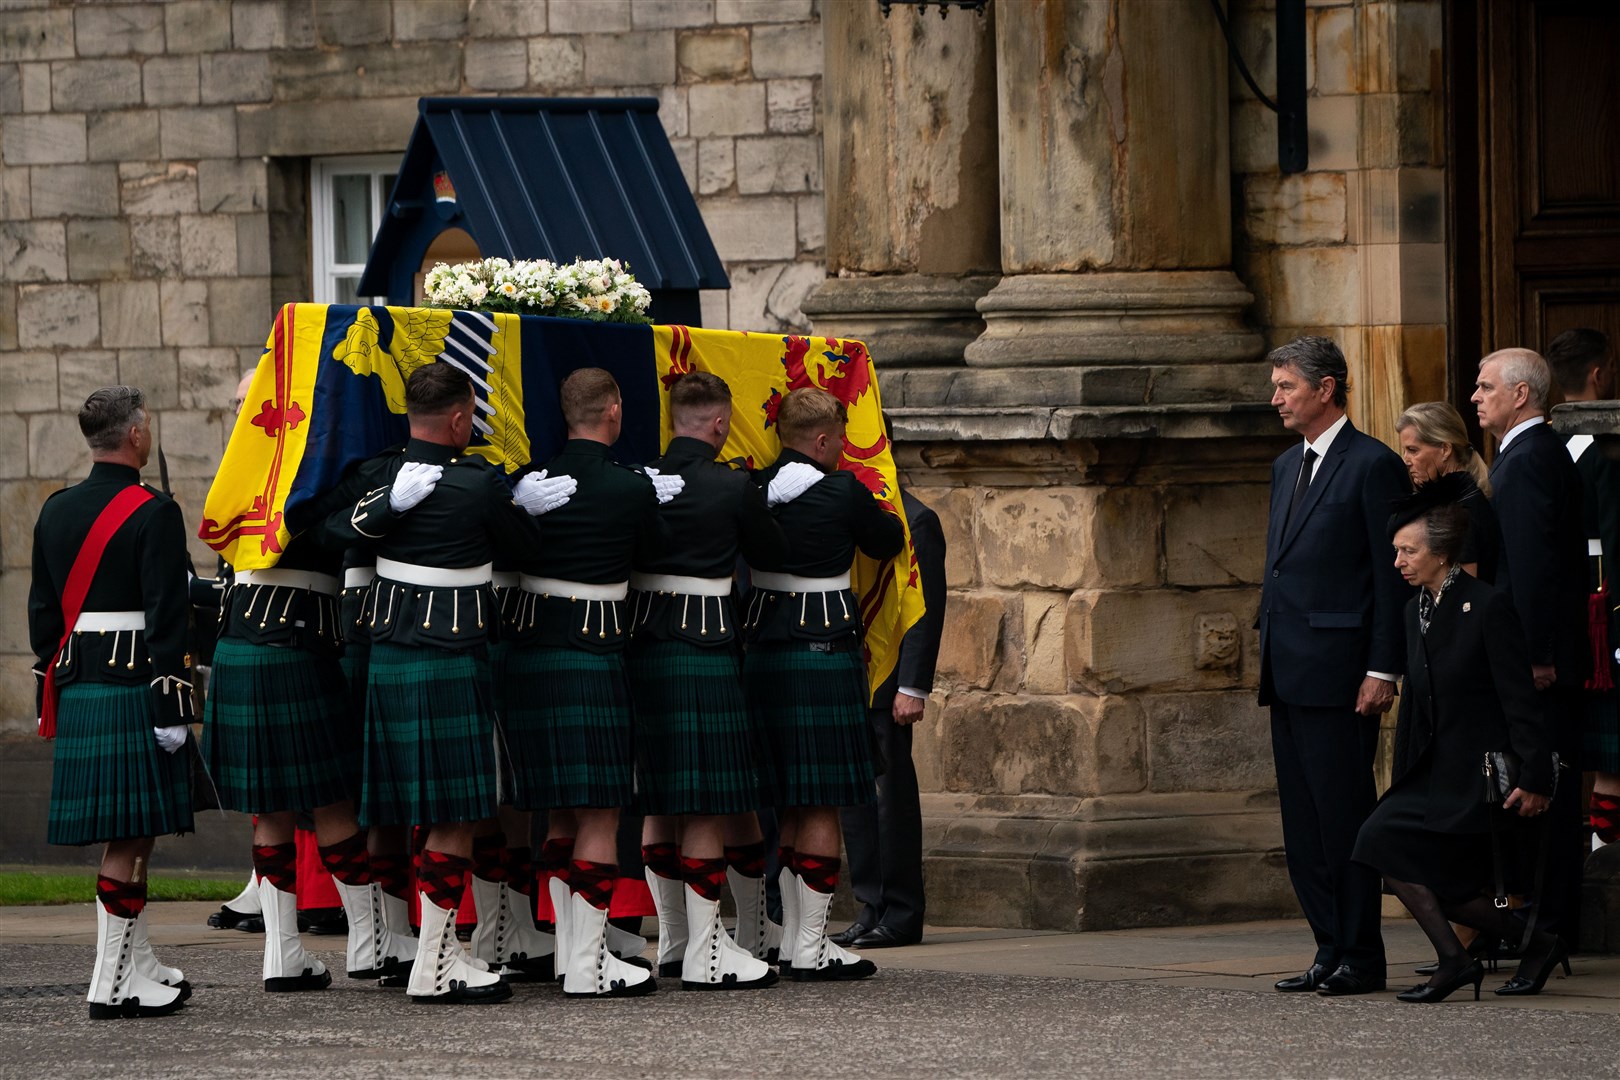 The Princess Royal curtseys to the Queen’s coffin as it arrives at the Palace of Holyroodhouse. Aaron Chown/PA